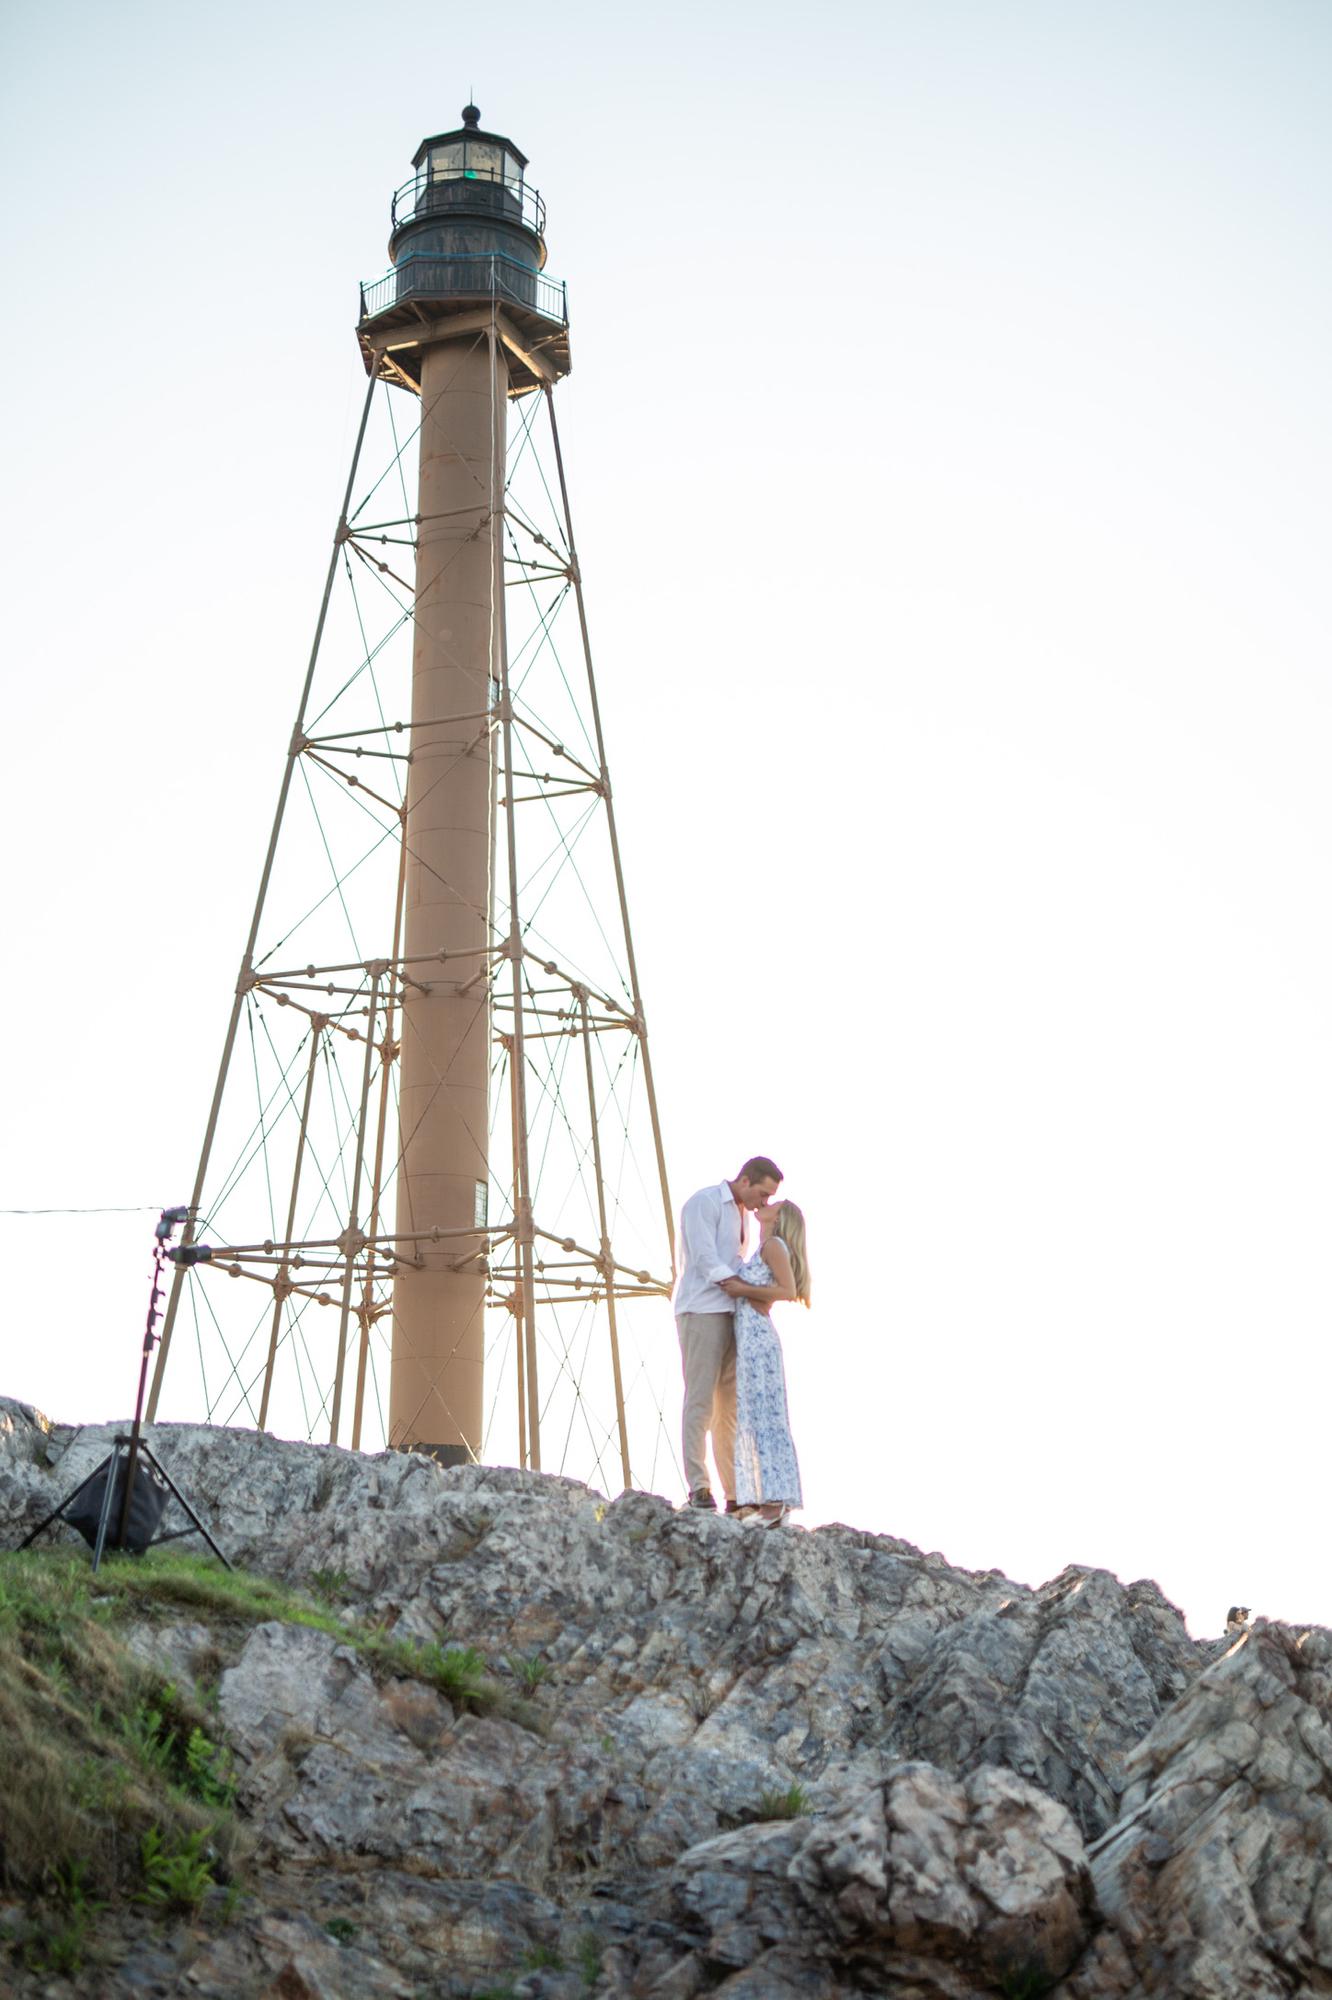 Our engagement shoot! Where we got engaged, Chandler Hovey Lighthouse.